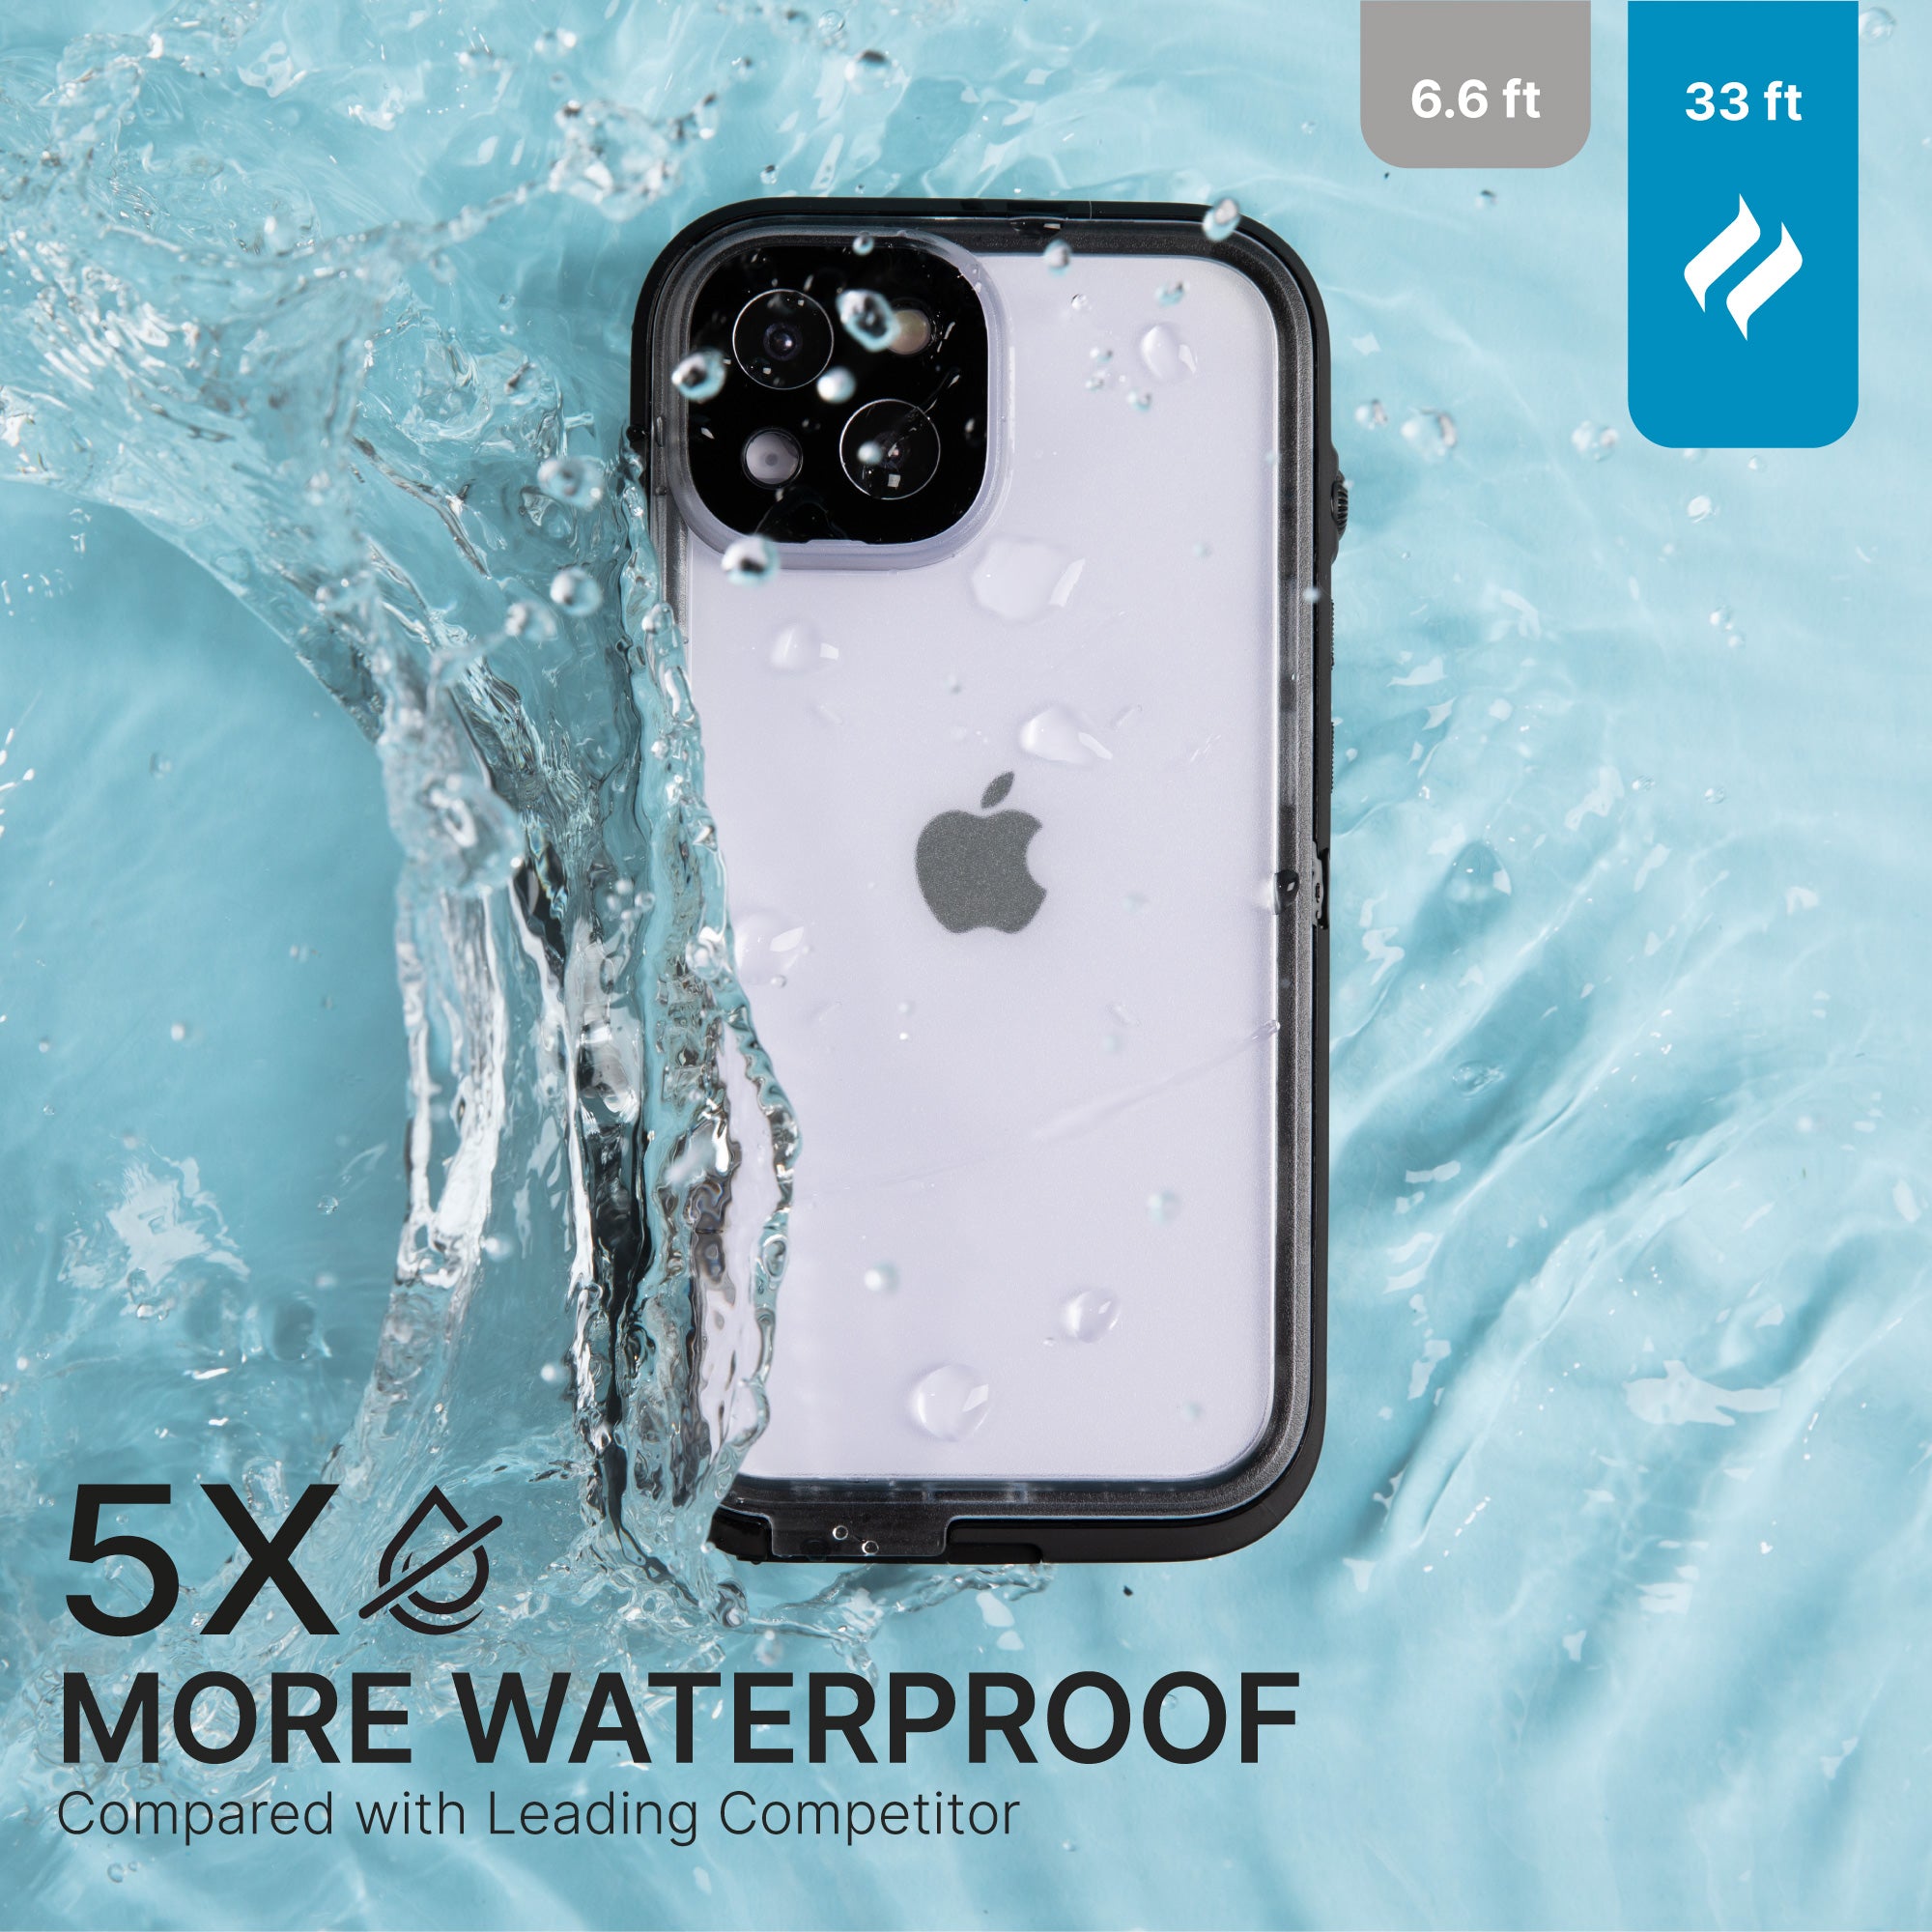 CATIPHO14BLKL-FBA | Catalyst iPhone 14 Plus Waterproof Case Total Protection case splashed in water 5 times more waterproof